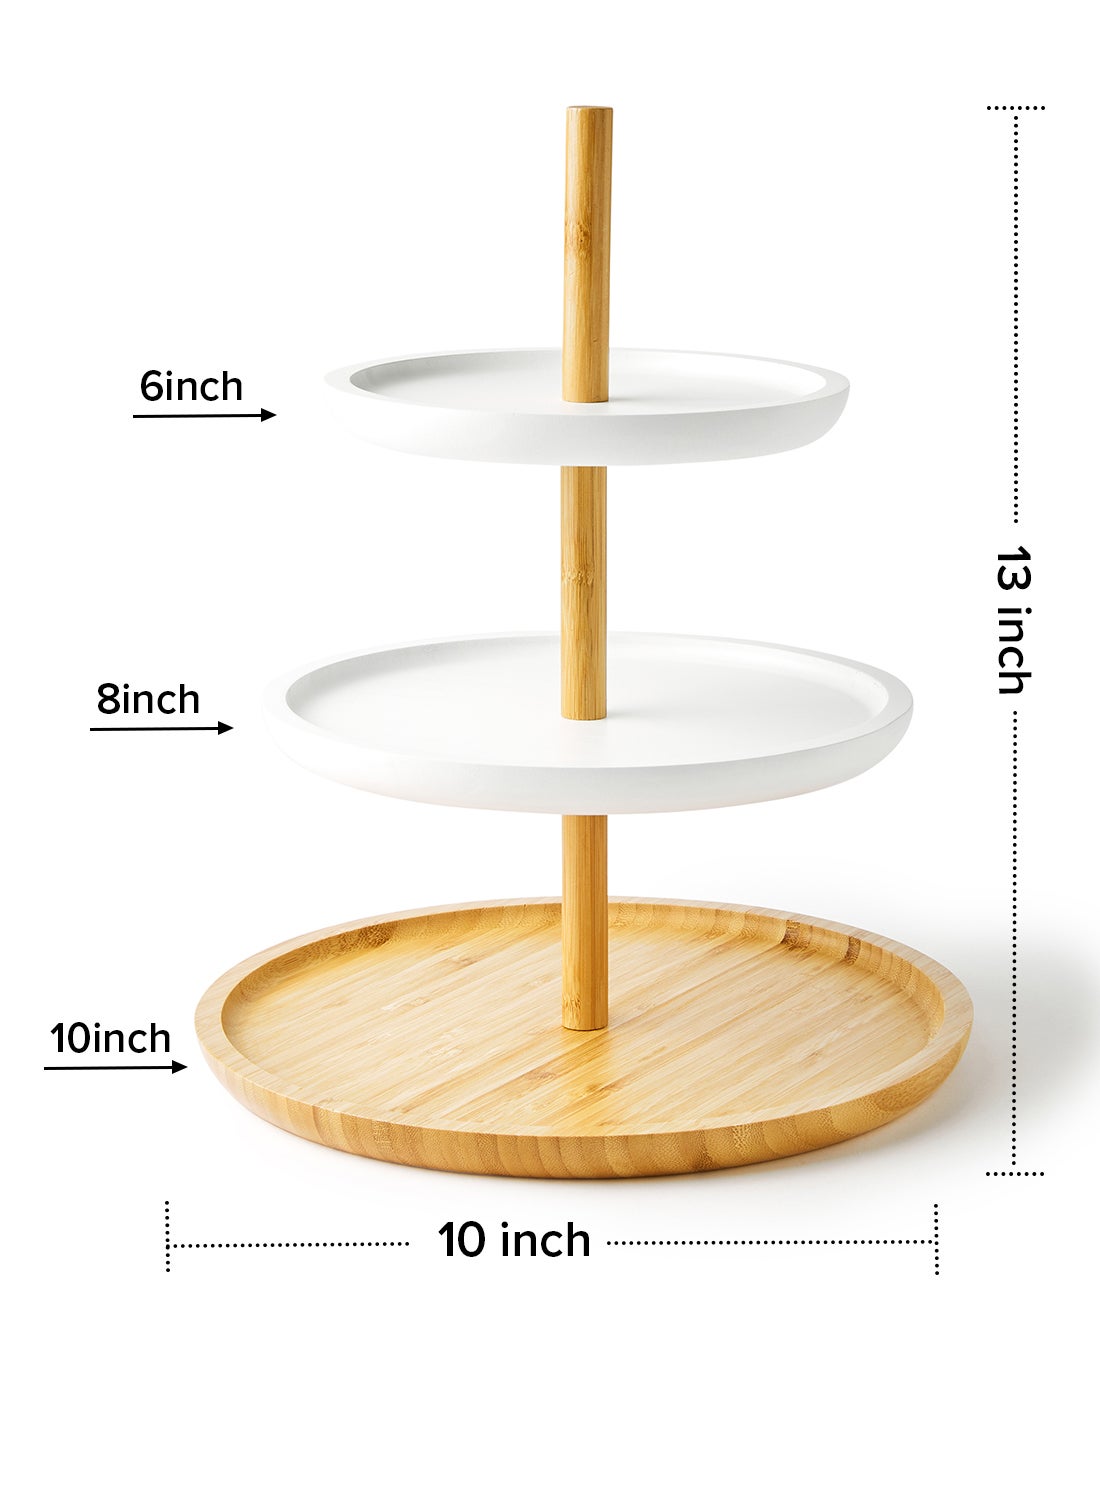 Bamboo Cake Stand - Serving Dish - For Cupcakes, Muffins, Snacks, Fruit - Cake Stand - Stand Cake - Cake Plate - Cake Dishes - White/Brown 